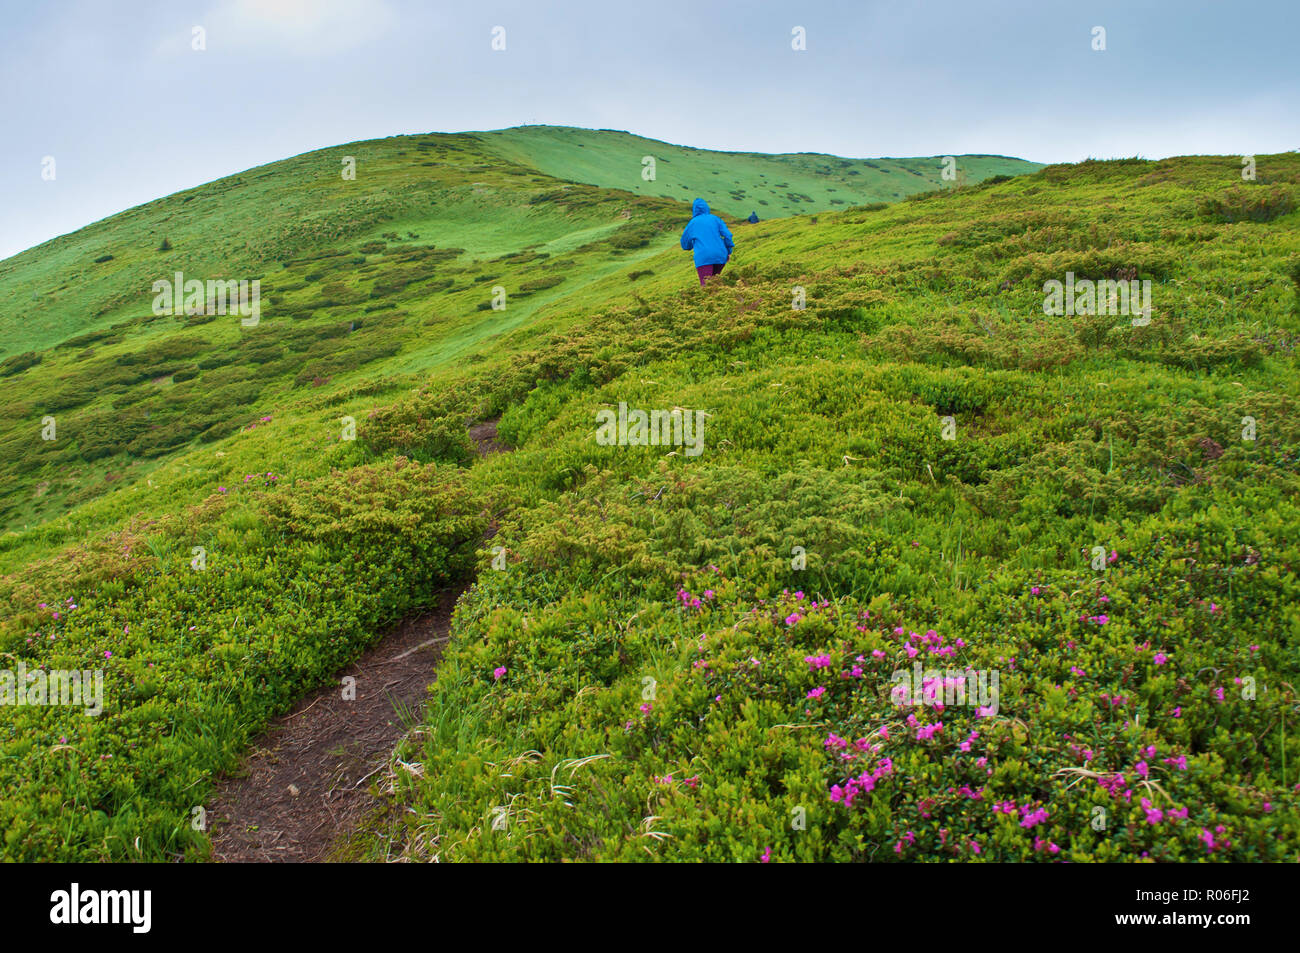 One traveler ascending up a winding path leading to majestic green mountain peak and hills covered in green lush grass and pink rhododendron flowers.  Stock Photo